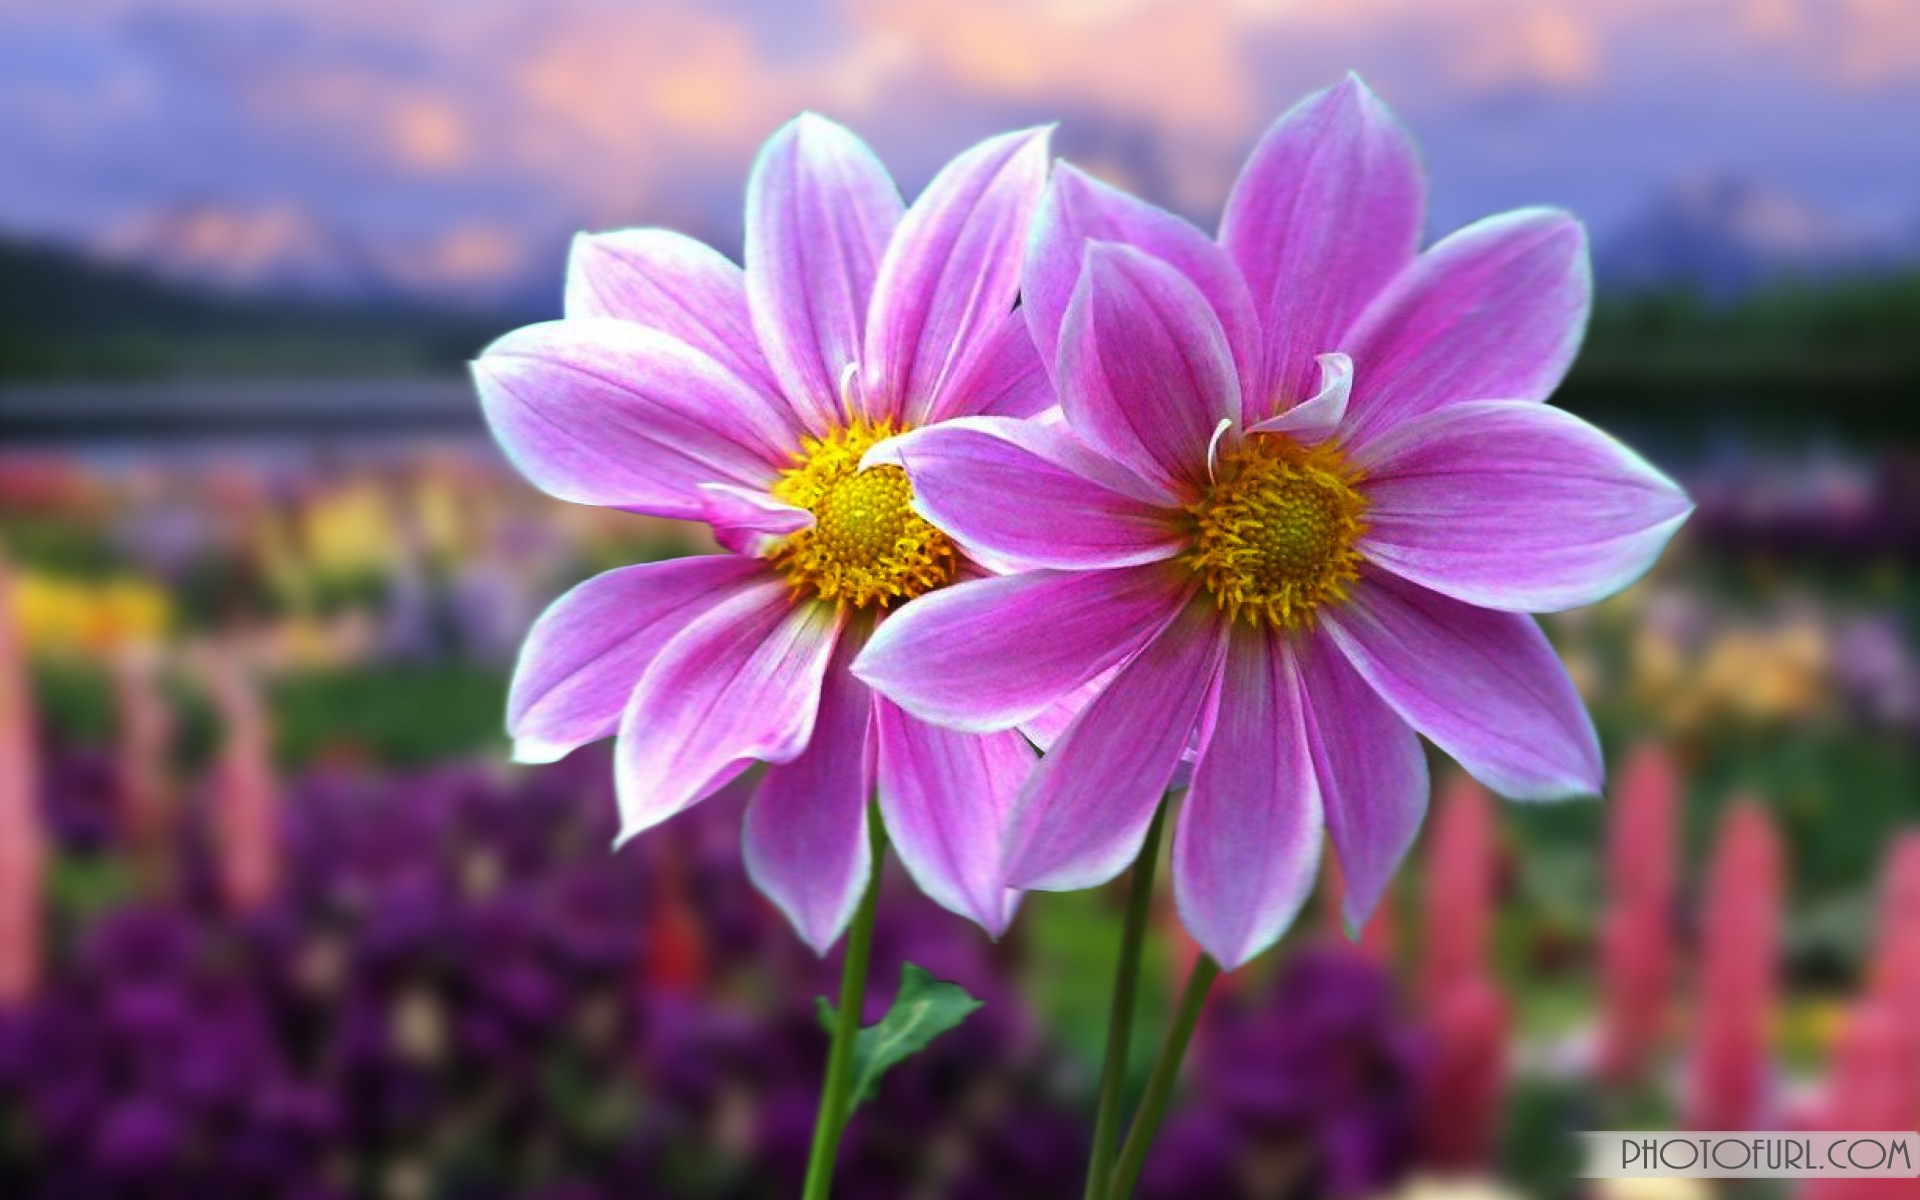 1920x1200 Definition big - on the desktop 924.7 kbytes, (Beautiful multicolored  artificial flowers background)